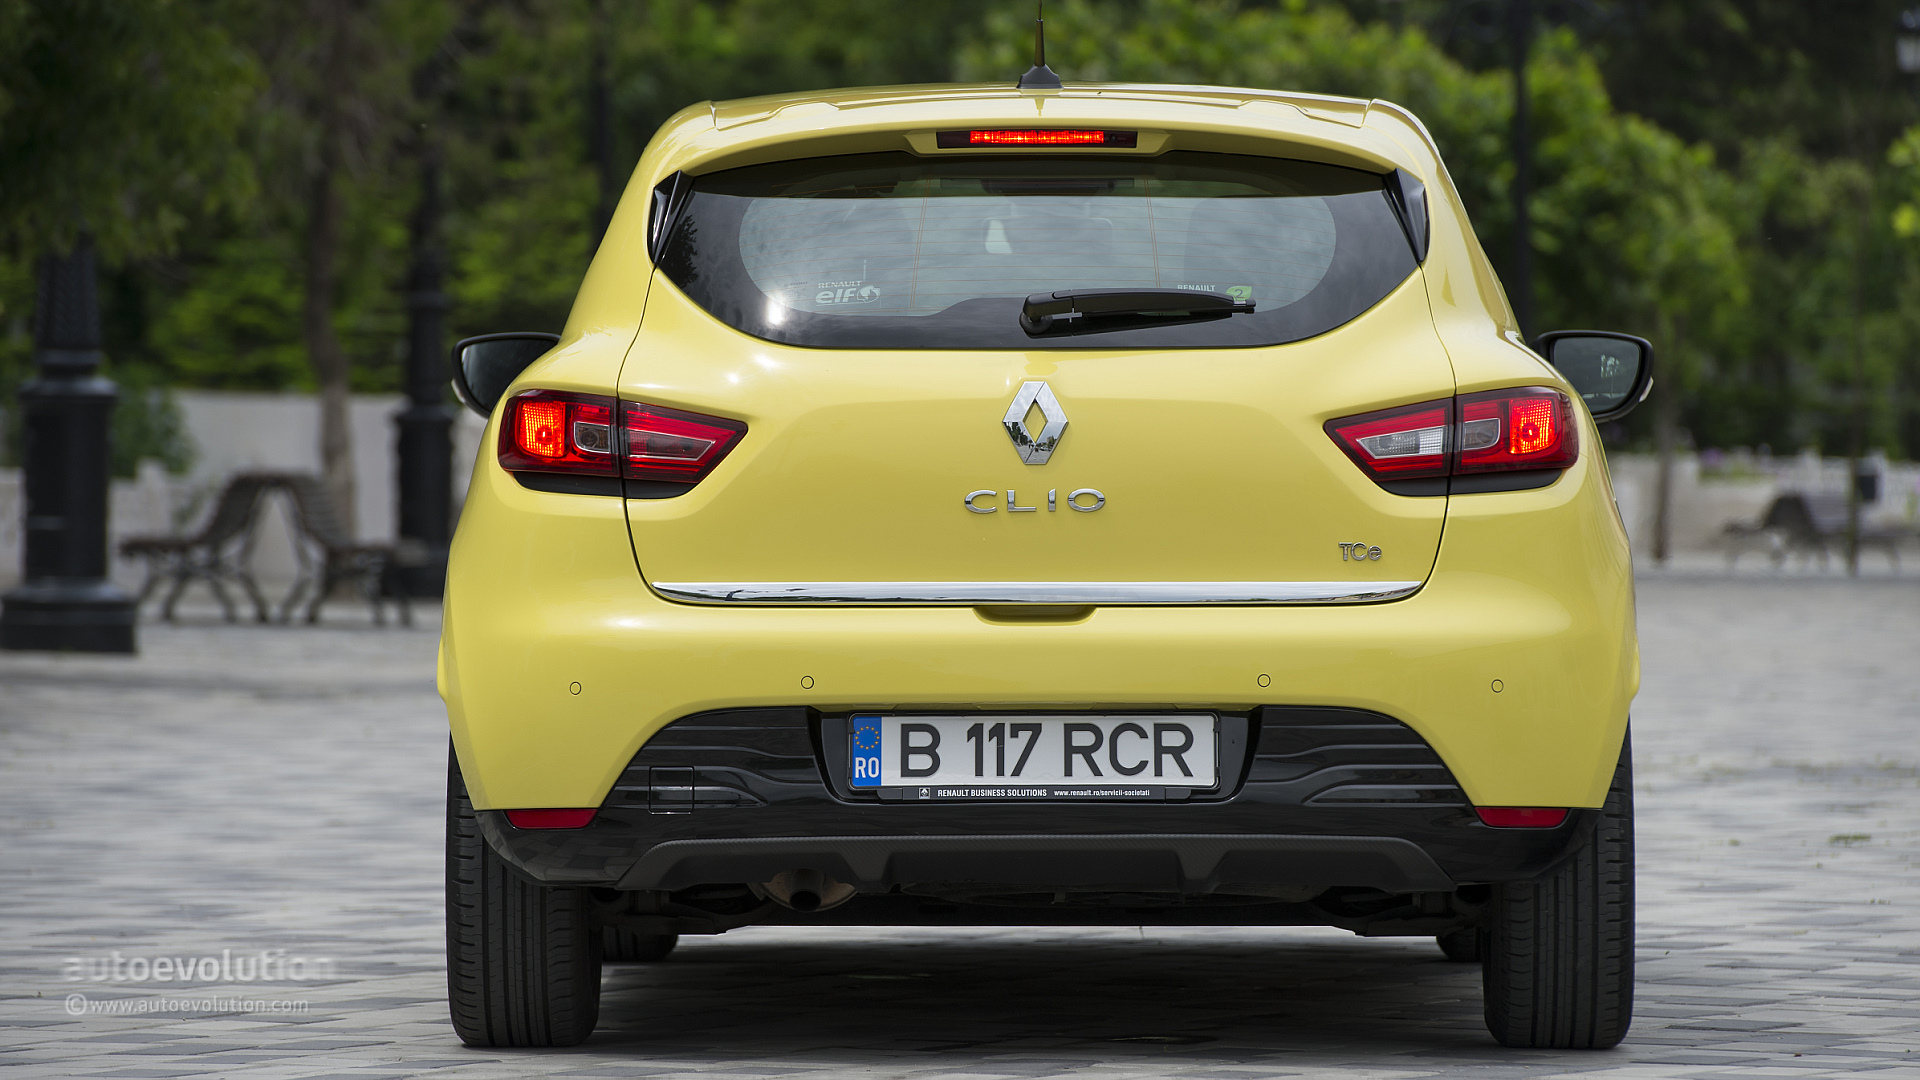 renault clio 0.9 tce review